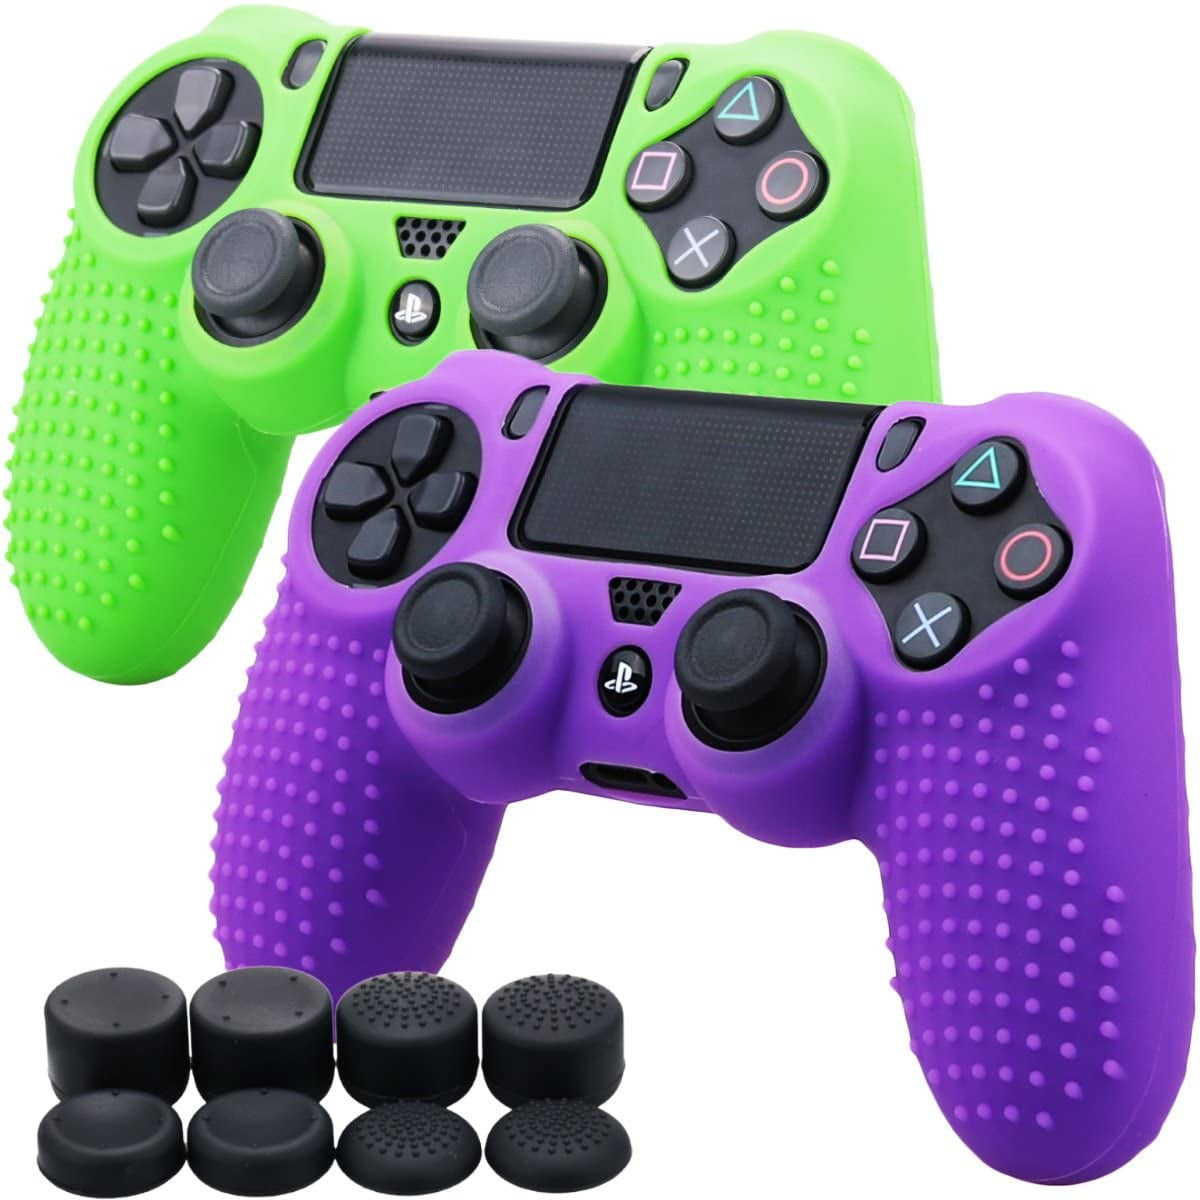 Silicone Rubber Cover Skin Case X 2 Anti-slip STUDDED Dots Customize for PS4/SLIM/PRO Controller x 1(Green & Purple) + FPS PRO Stick Cover Thumb Grips x 8